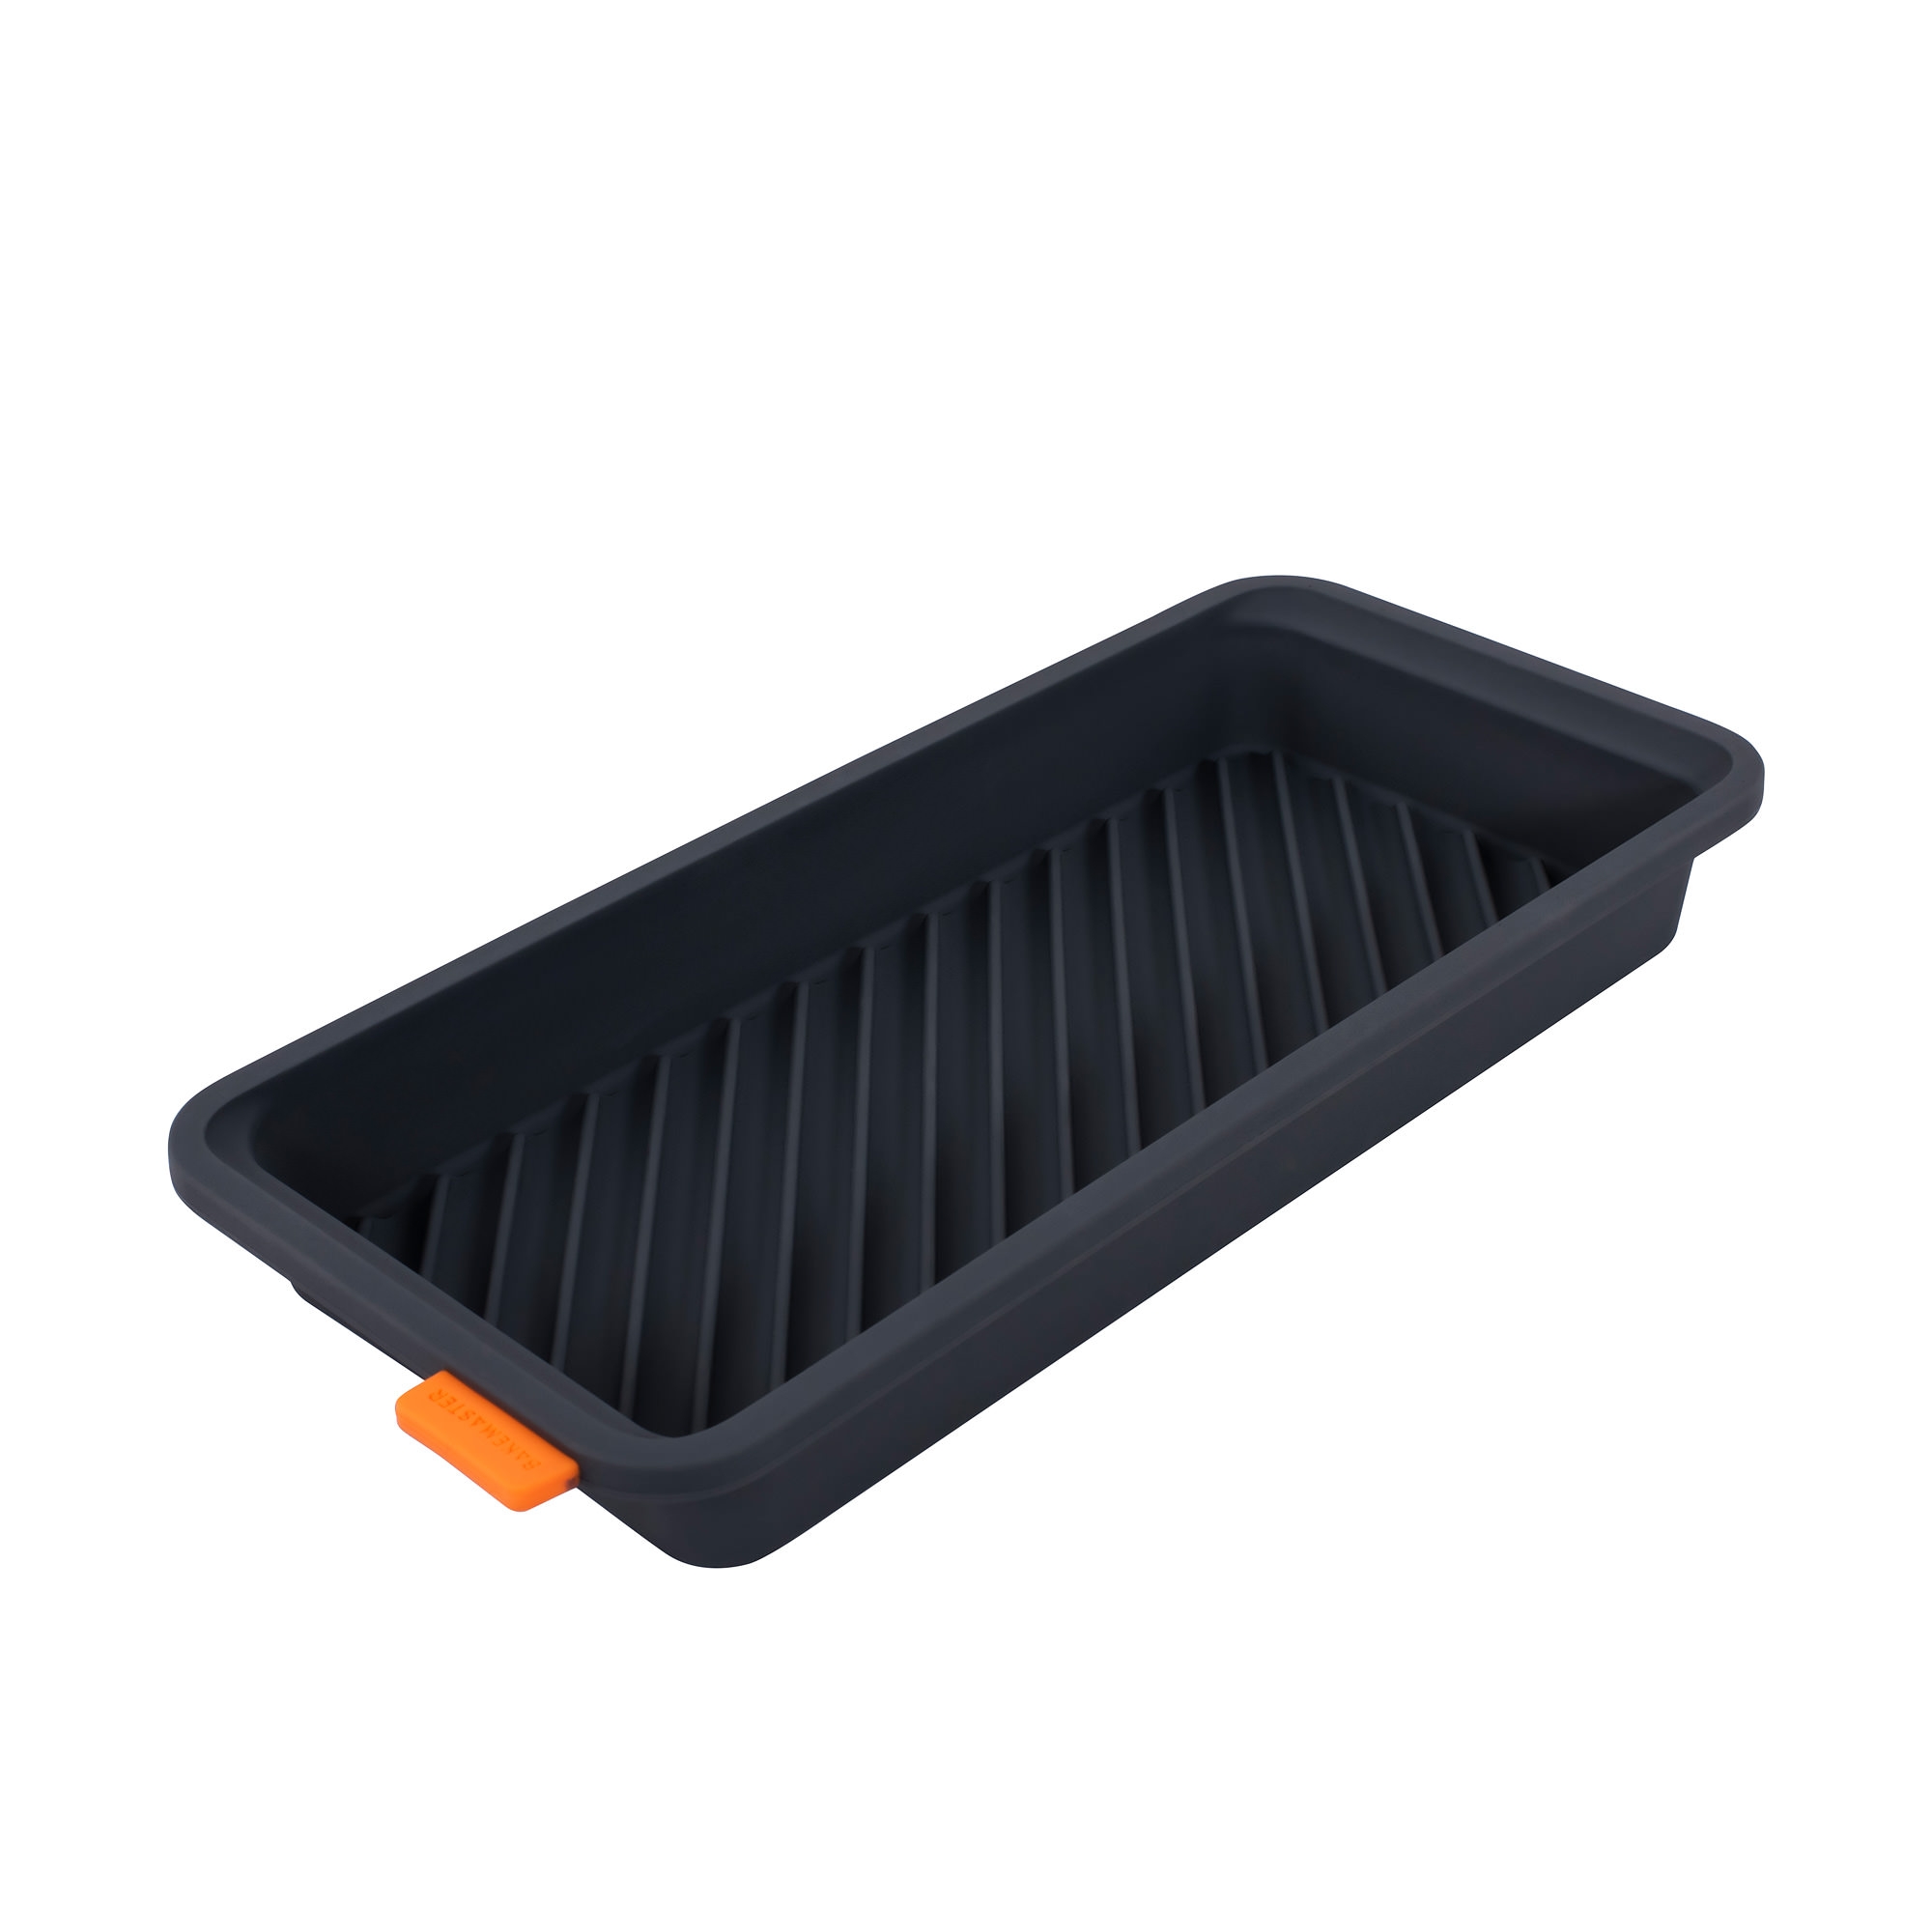 Bakemaster Reinforced Silicone Grill Divider Tray 28x13cm Image 1